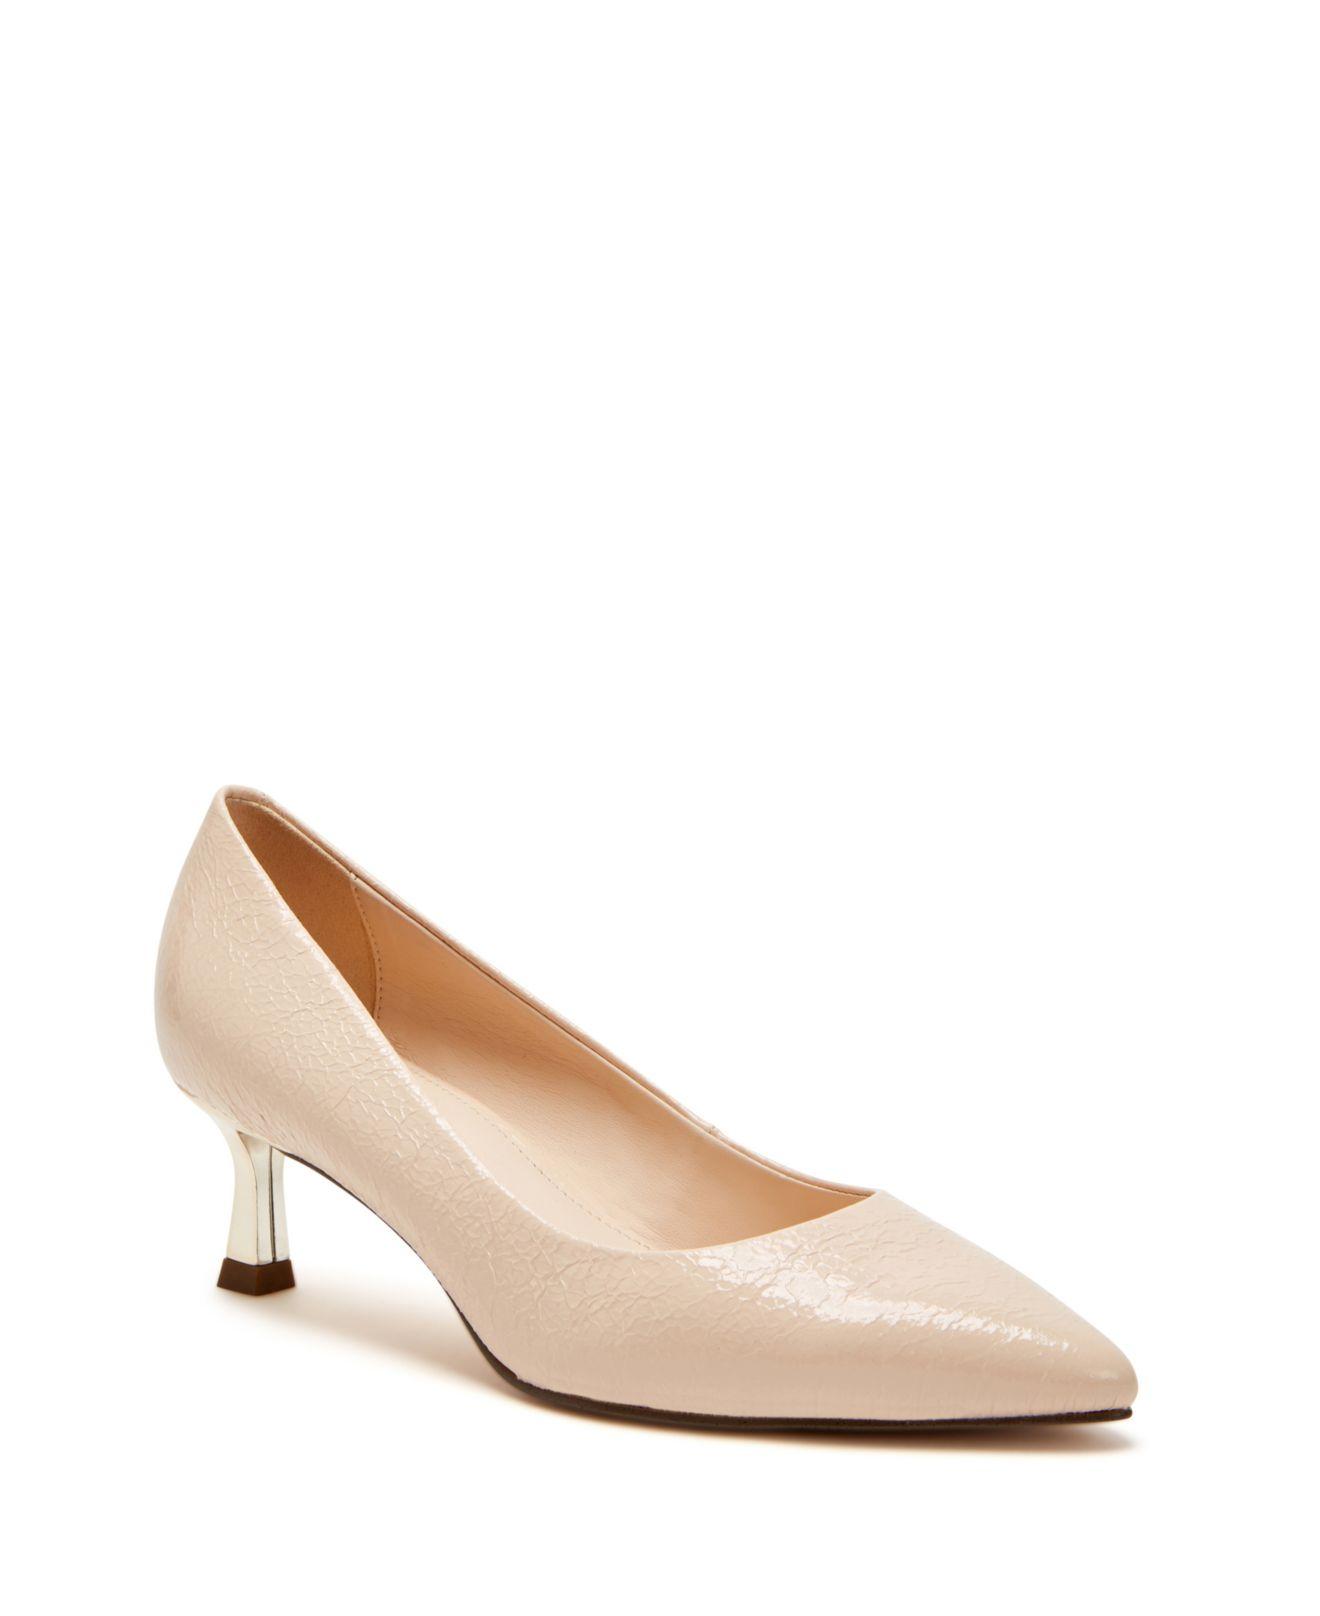 Katy Perry The Golden Slip-on Pumps in Natural | Lyst